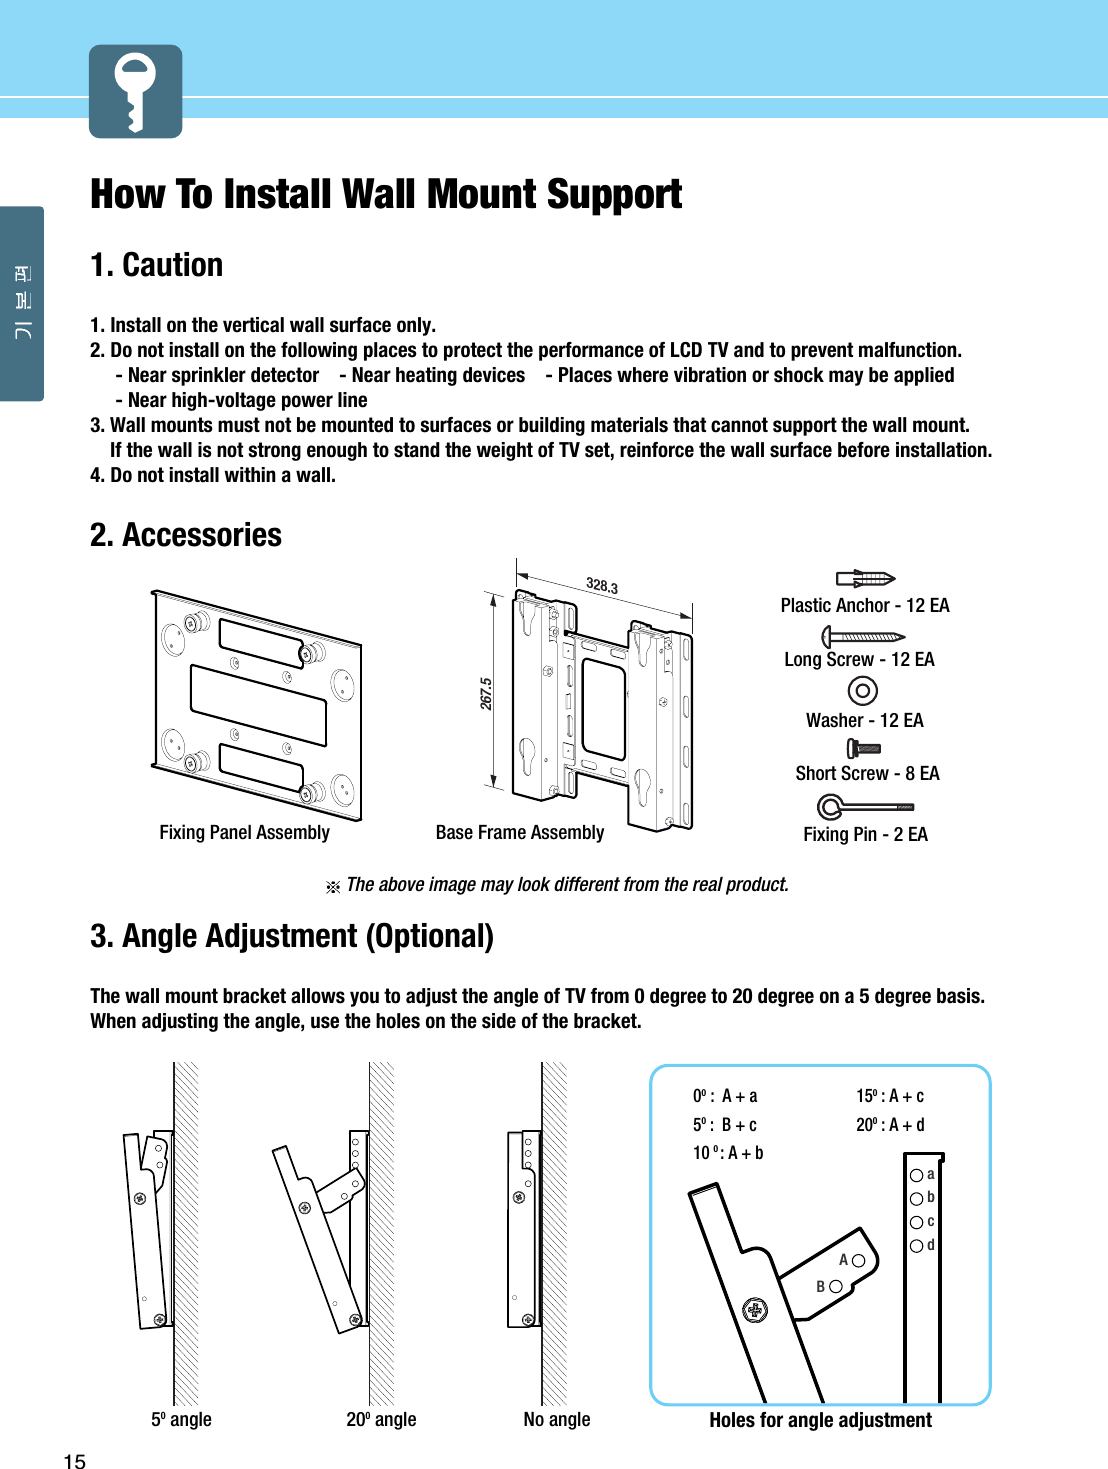 15How To Install Wall Mount Support1. Caution1. Install on the vertical wall surface only.2. Do not install on the following places to protect the performance of LCD TV and to prevent malfunction.- Near sprinkler detector    - Near heating devices    - Places where vibration or shock may be applied - Near high-voltage power line 3. Wall mounts must not be mounted to surfaces or building materials that cannot support the wall mount.If the wall is not strong enough to stand the weight of TV set, reinforce the wall surface before installation.4. Do not install within a wall.2. AccessoriesThe above image may look different from the real product.3. Angle Adjustment (Optional)The wall mount bracket allows you to adjust the angle of TV from 0 degree to 20 degree on a 5 degree basis.When adjusting the angle, use the holes on the side of the bracket.50angle 200angle No angleabcdHoles for angle adjustment00:  A + a50:  B + c100: A + b150: A + c200: A + dAB267.5328.3Base Frame Assembly Fixing Pin - 2 EAShort Screw - 8 EAWasher - 12 EALong Screw - 12 EAPlastic Anchor - 12 EAFixing Panel Assembly